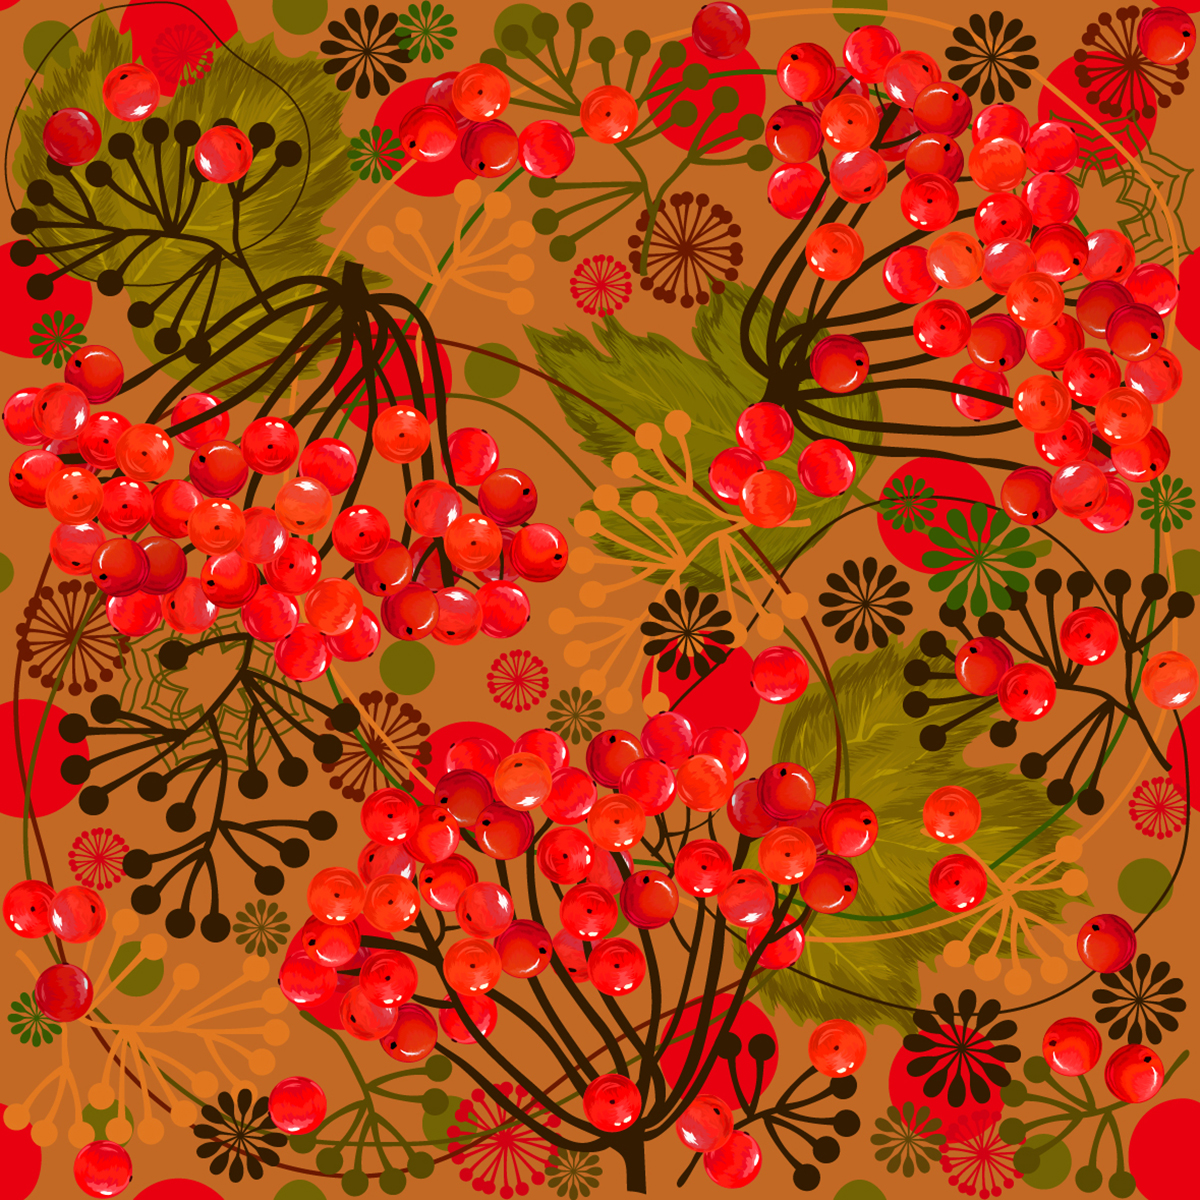 A red berries on a brown background